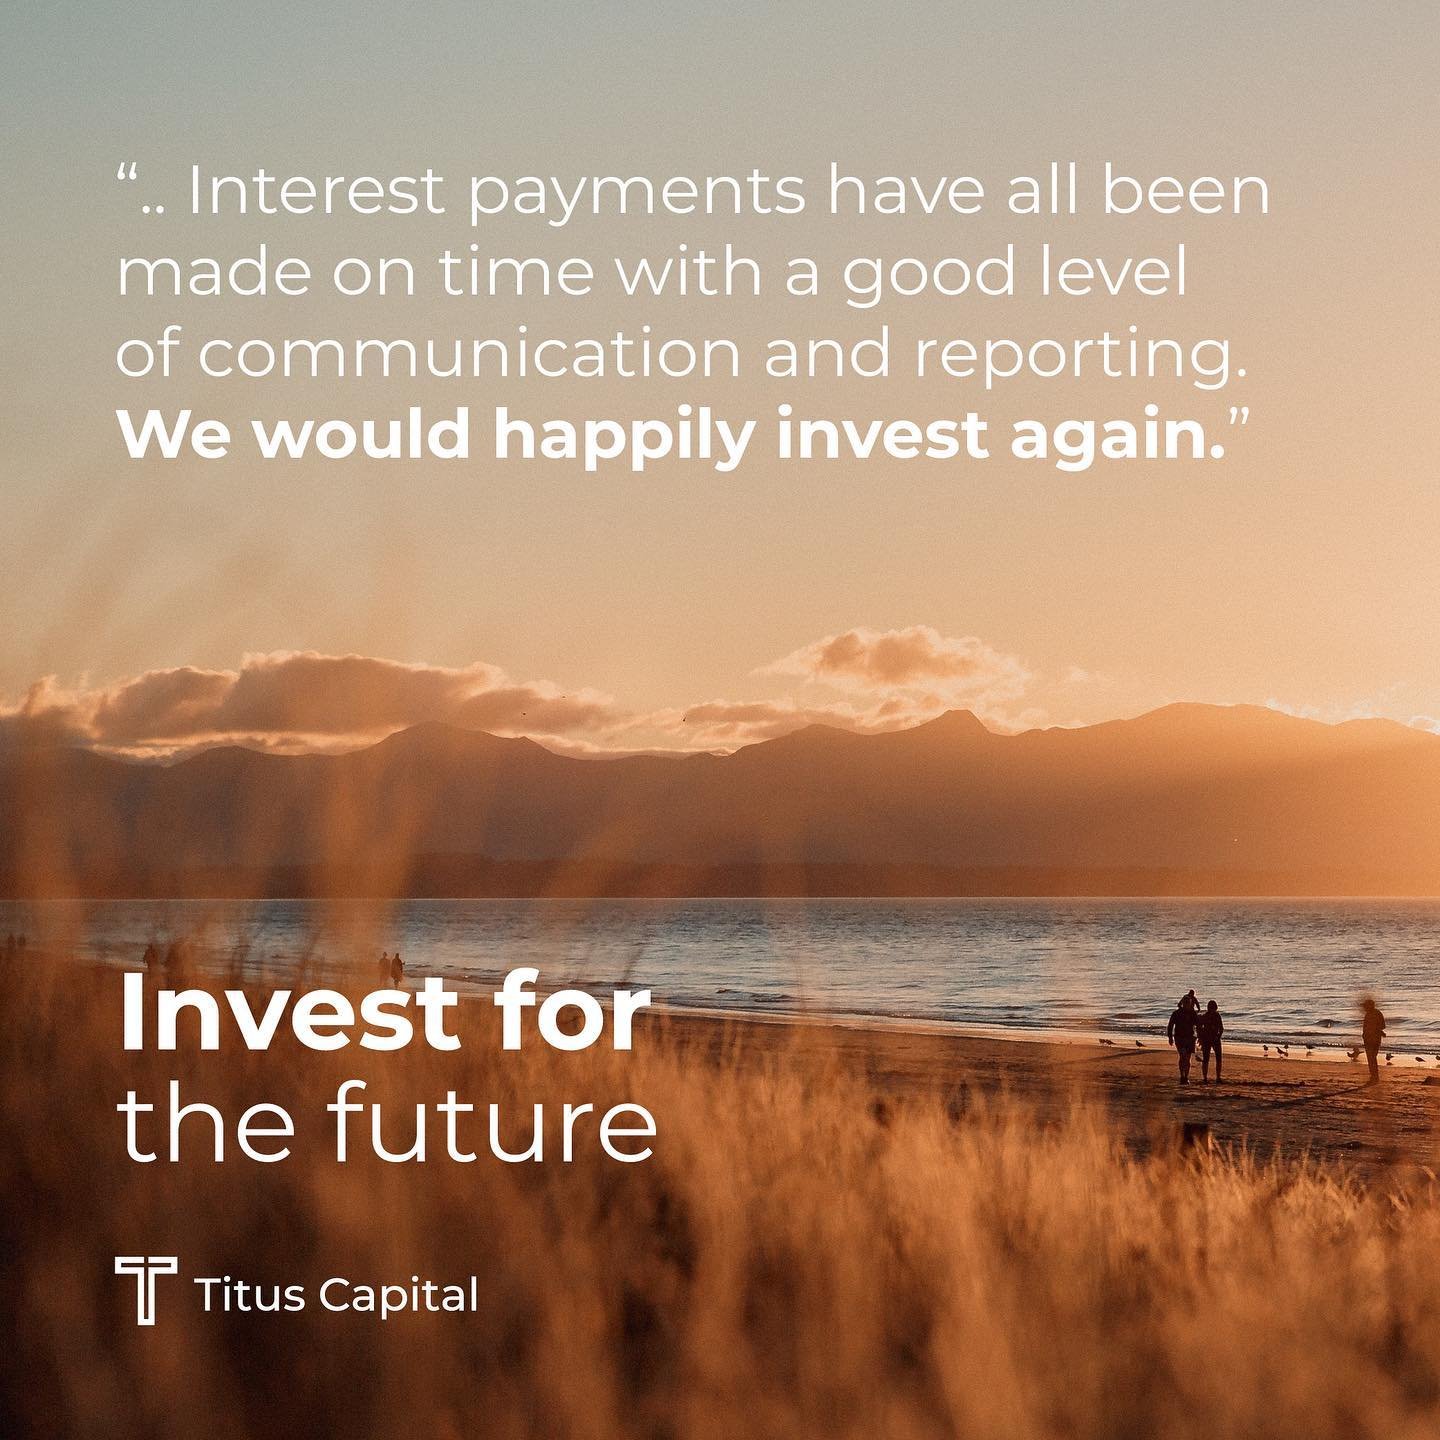 Invest in your future with Titus Capital. 

Invest and receive a 10% return per annum. Let your money work for you now, so you can relax later. 

[Contact the team for more details]